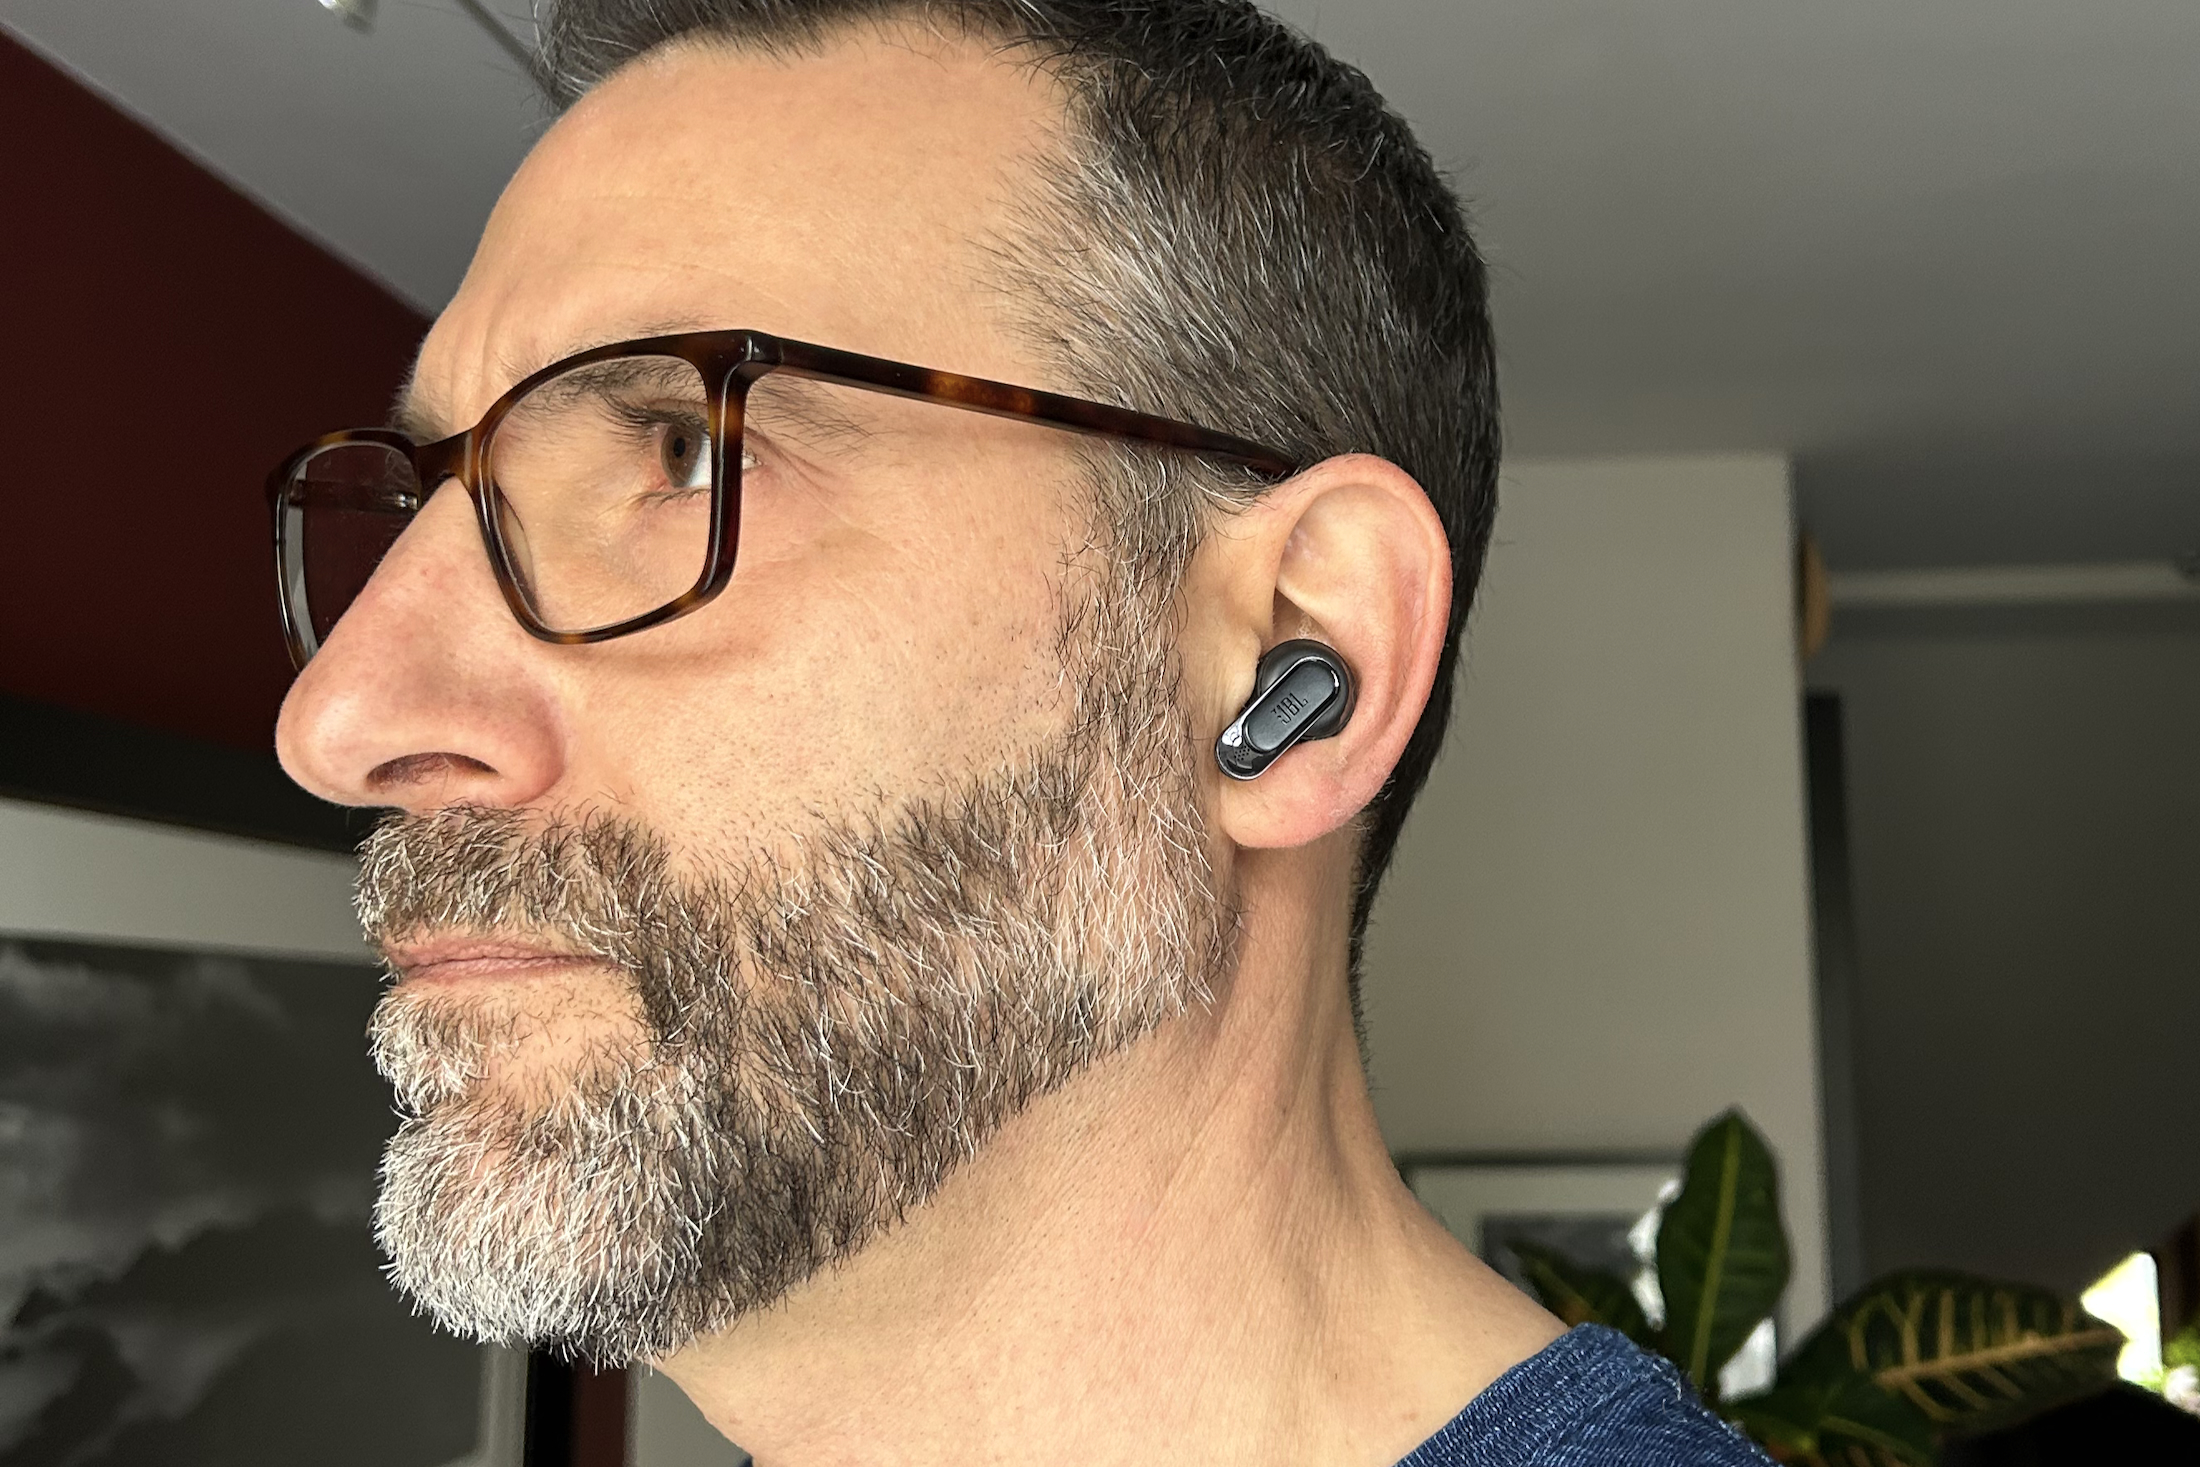 JBL Tour Pro 2 Wireless Earbuds Review - Touchscreen Wireless Earbuds